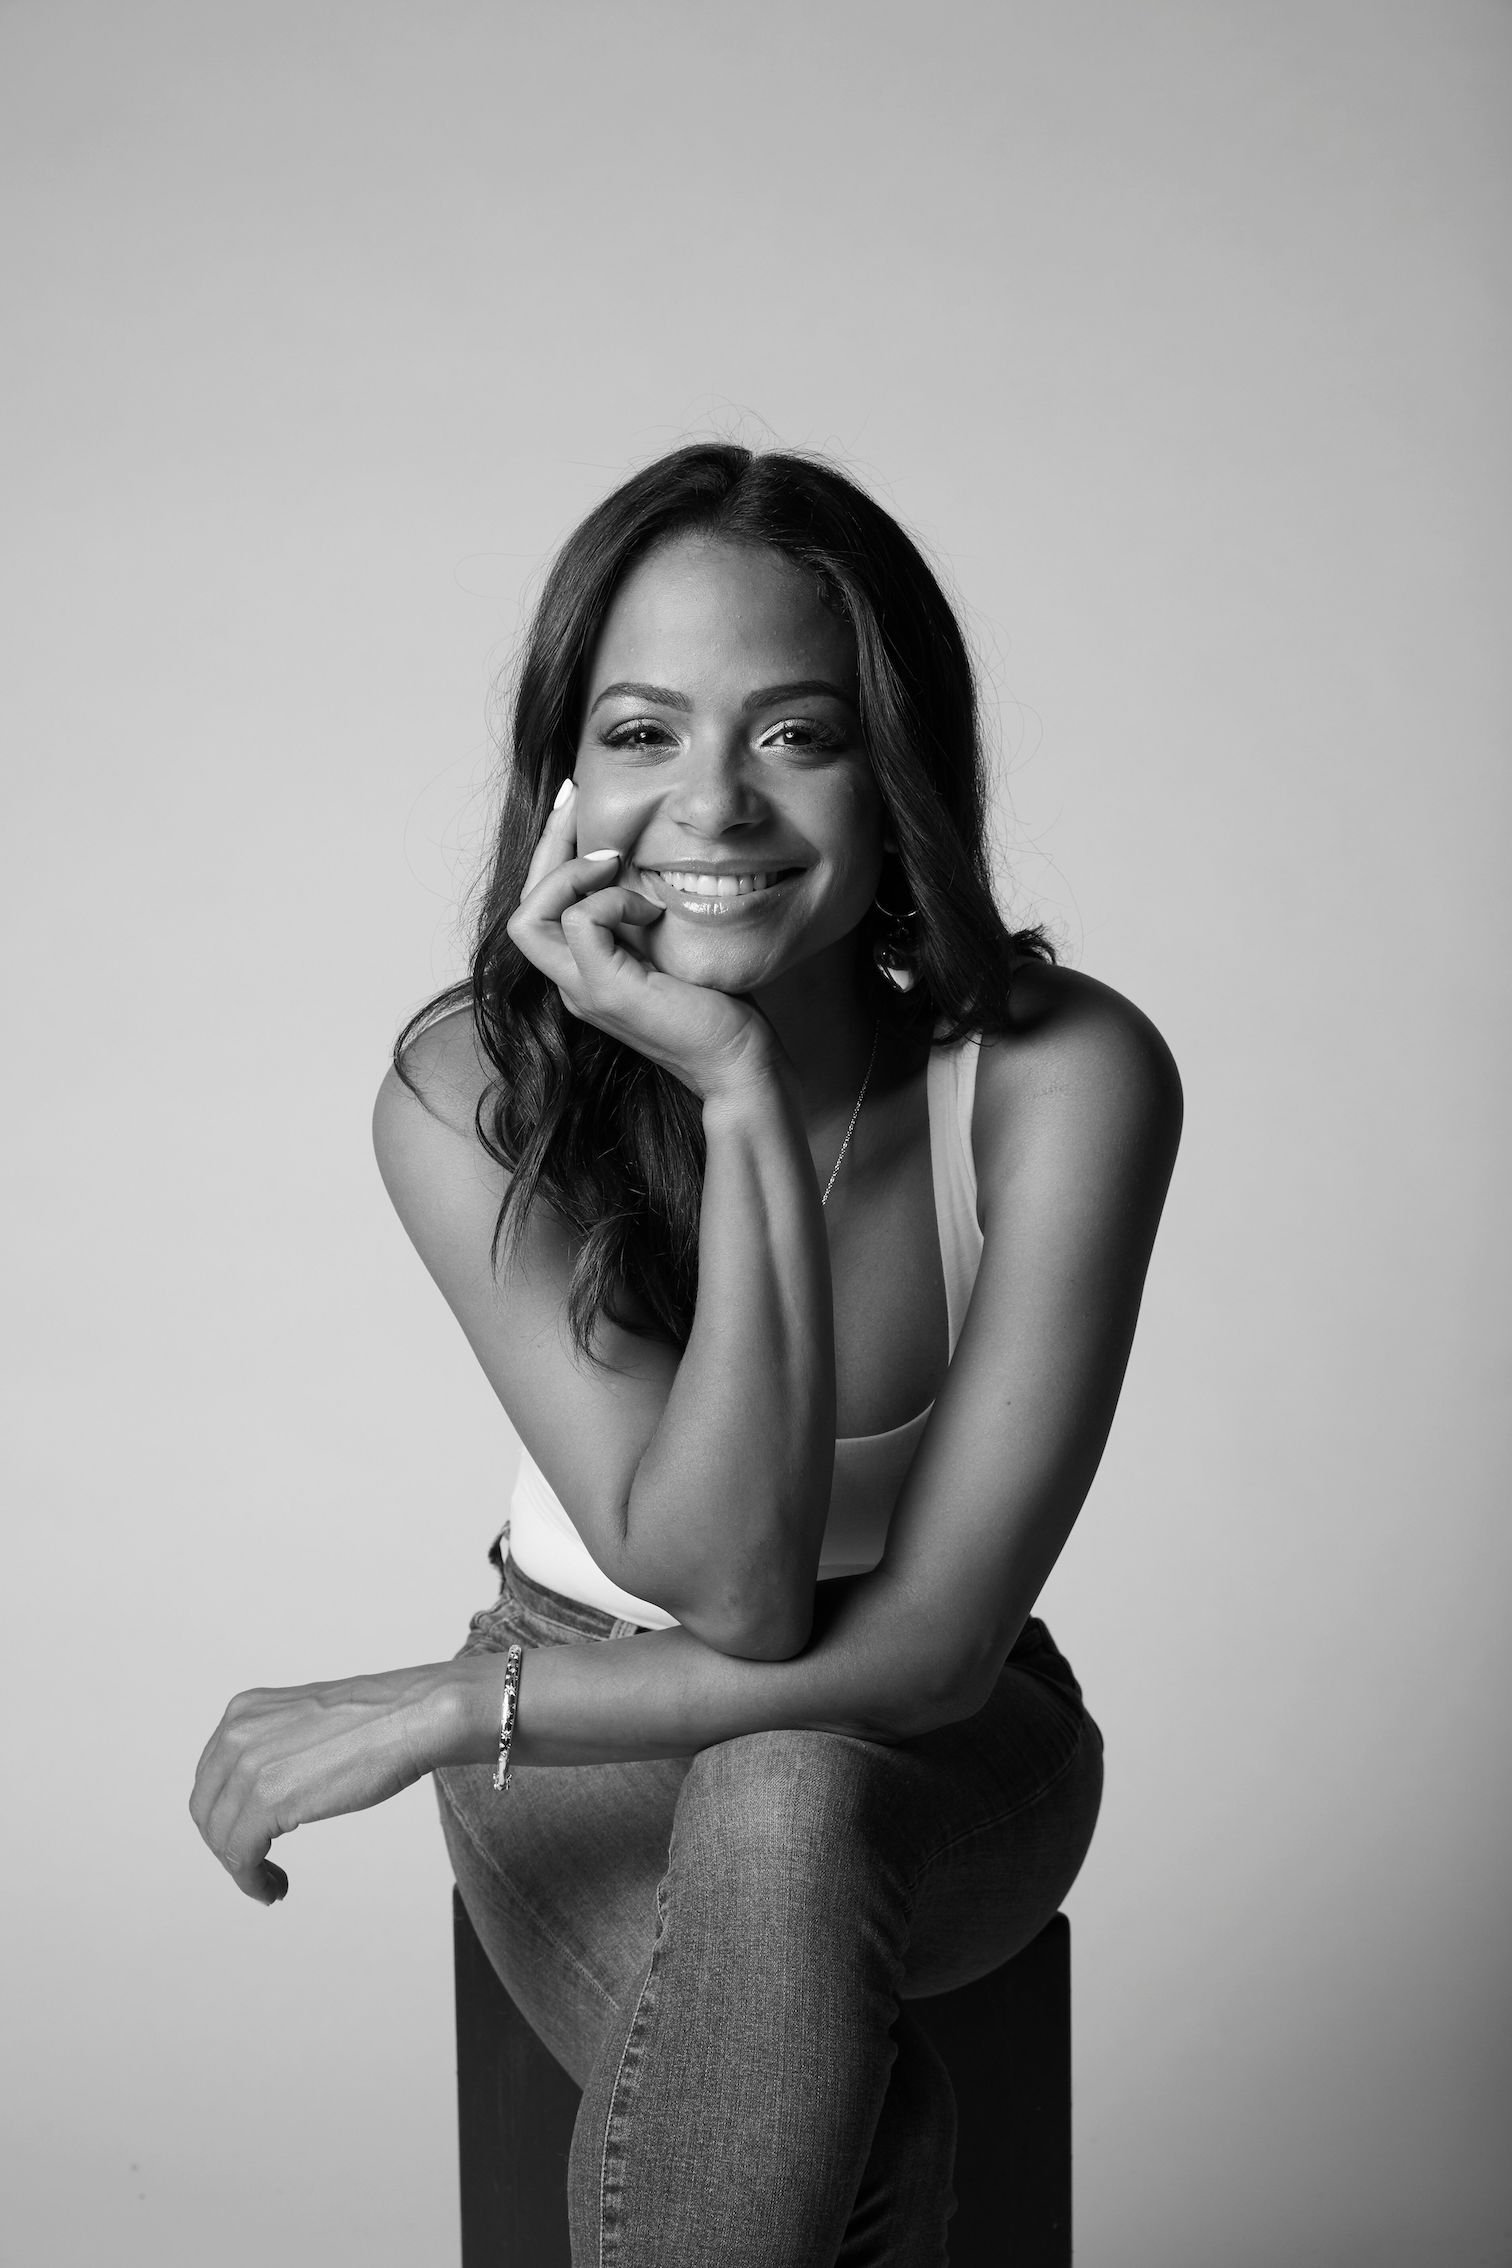 Christina Milian To Star In And Executive Produce Holiday Rom Com Meet Me Next Christmas For